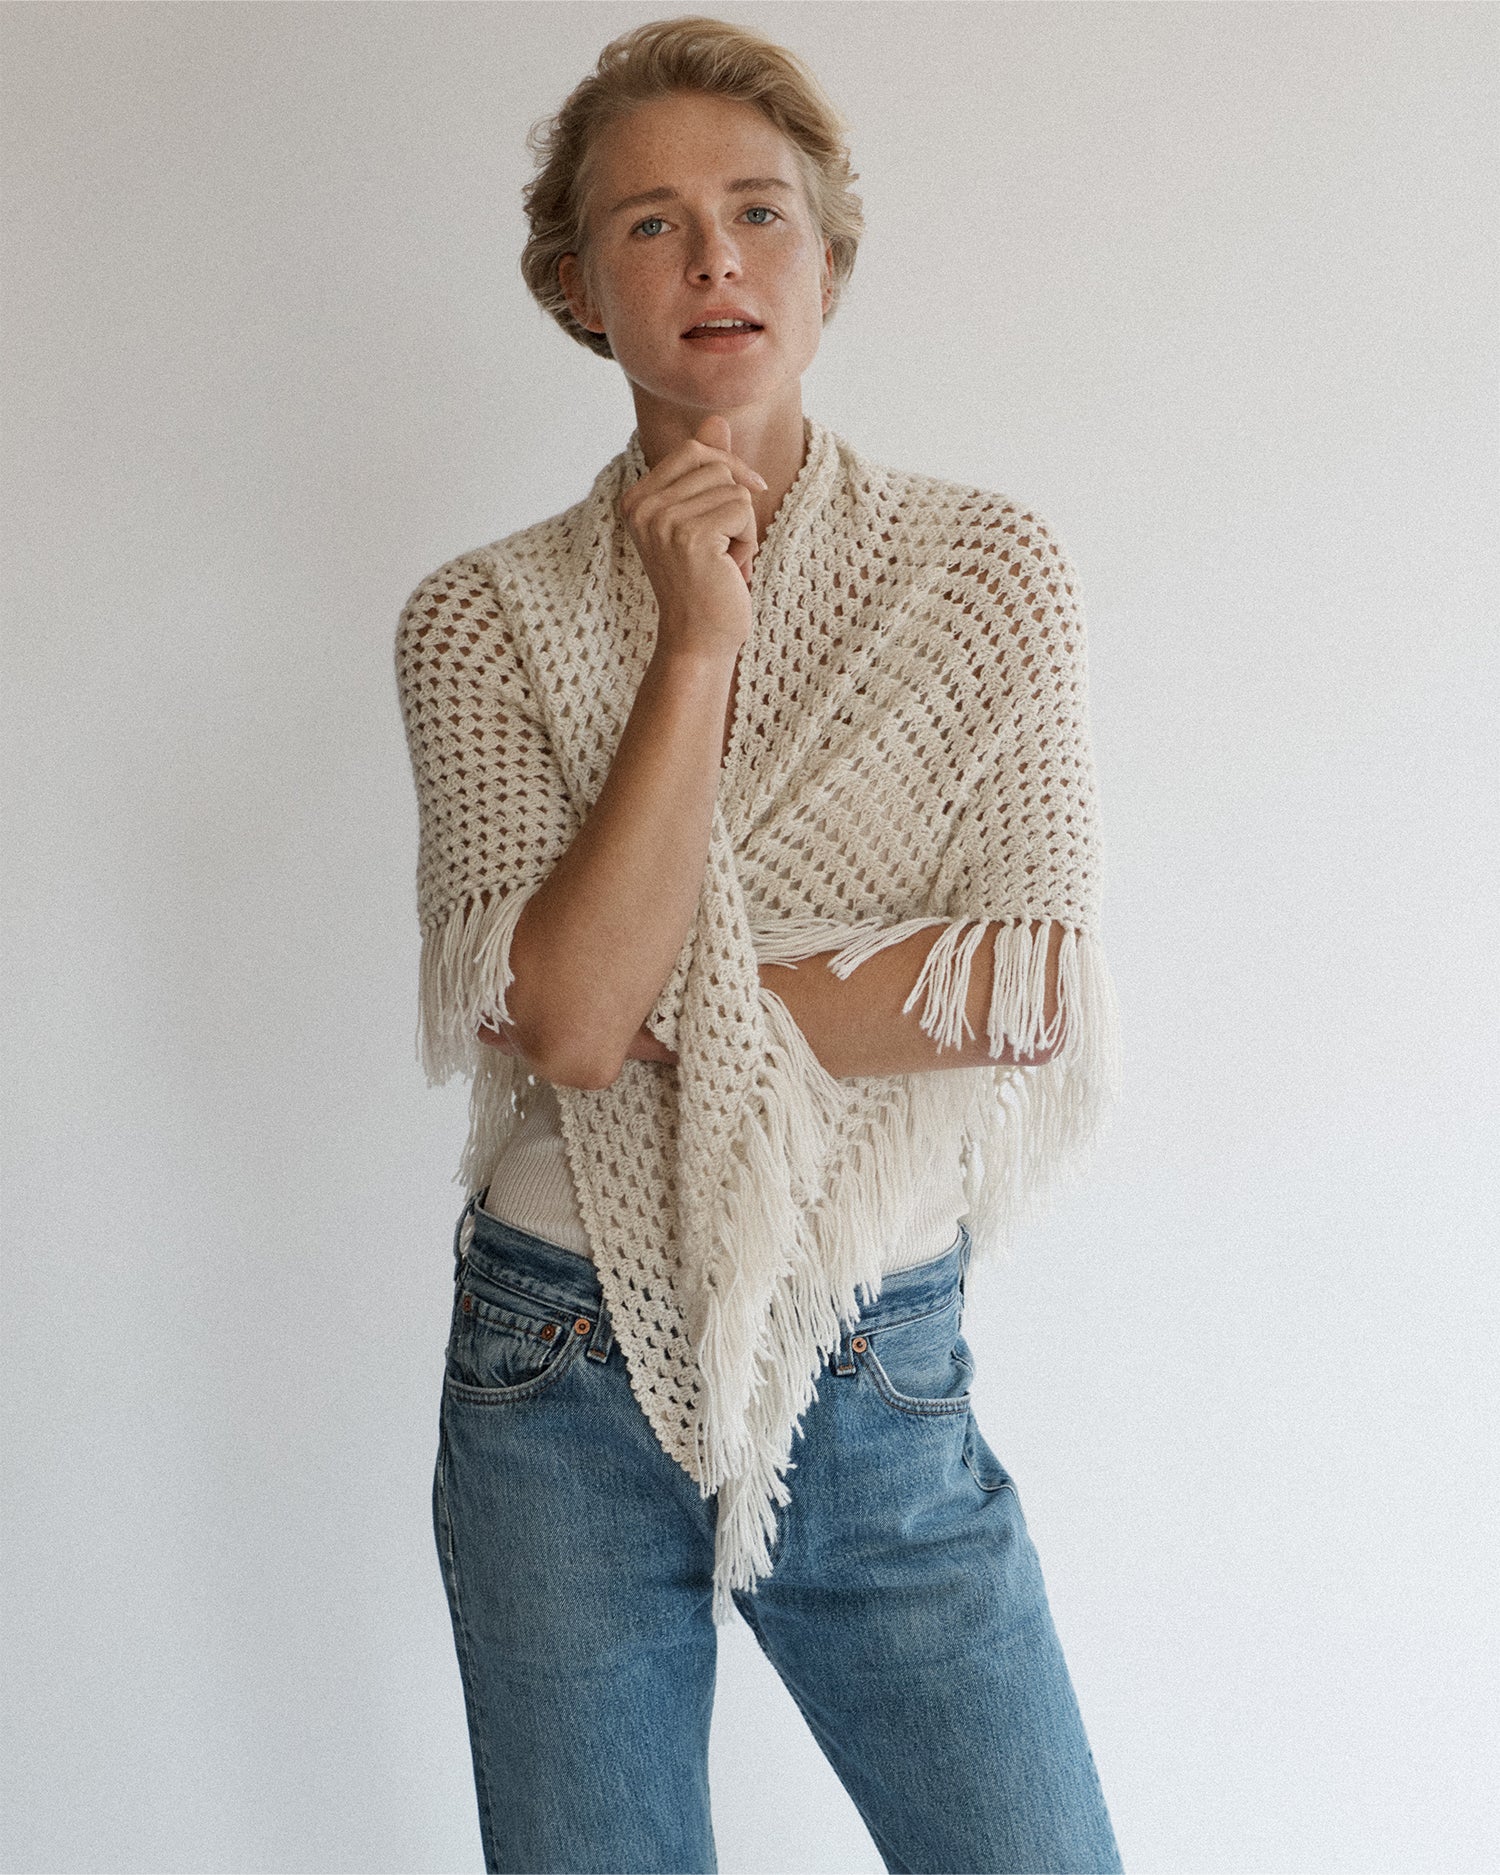 Woman standing and wrapping a cream-colored shawl around herself. Shawl is hand-crocheted and has fringe.